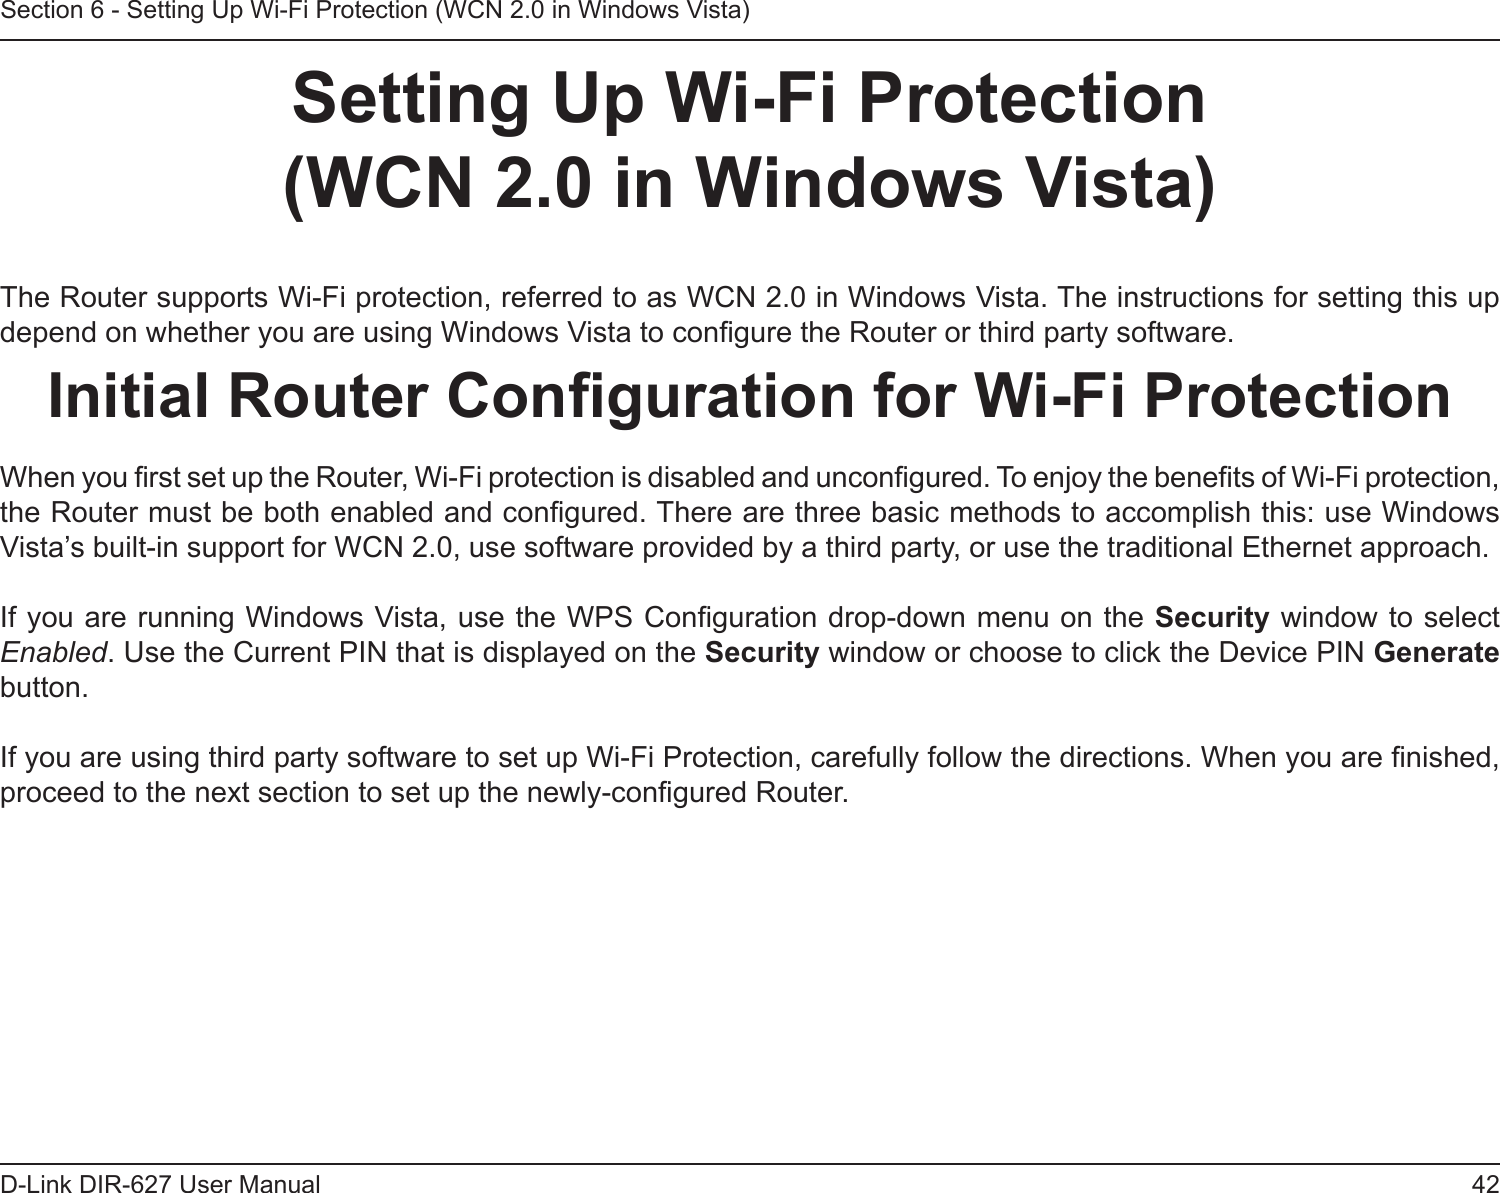 42D-Link DIR-627 User ManualSection 6 - Setting Up Wi-Fi Protection (WCN 2.0 in Windows Vista)SettingUpWi-FiProtection (WCN2.0inWindowsVista)The Router supports Wi-Fi protection, referred to as WCN 2.0 in Windows Vista. The instructions for setting this up depend on whether you are using Windows Vista to congure the Router or third party software.InitialRouterCongurationforWi-FiProtectionWhen you rst set up the Router, Wi-Fi protection is disabled and uncongured. To enjoy the benets of Wi-Fi protection, the Router must be both enabled and congured. There are three basic methods to accomplish this: use Windows Vista’s built-in support for WCN 2.0, use software provided by a third party, or use the traditional Ethernet approach. If you are running Windows Vista, use the WPS Conguration drop-down menu on the Security window to select Enabled. Use the Current PIN that is displayed on the Security window or choose to click the Device PIN Generate button. If you are using third party software to set up Wi-Fi Protection, carefully follow the directions. When you are nished, proceed to the next section to set up the newly-congured Router.